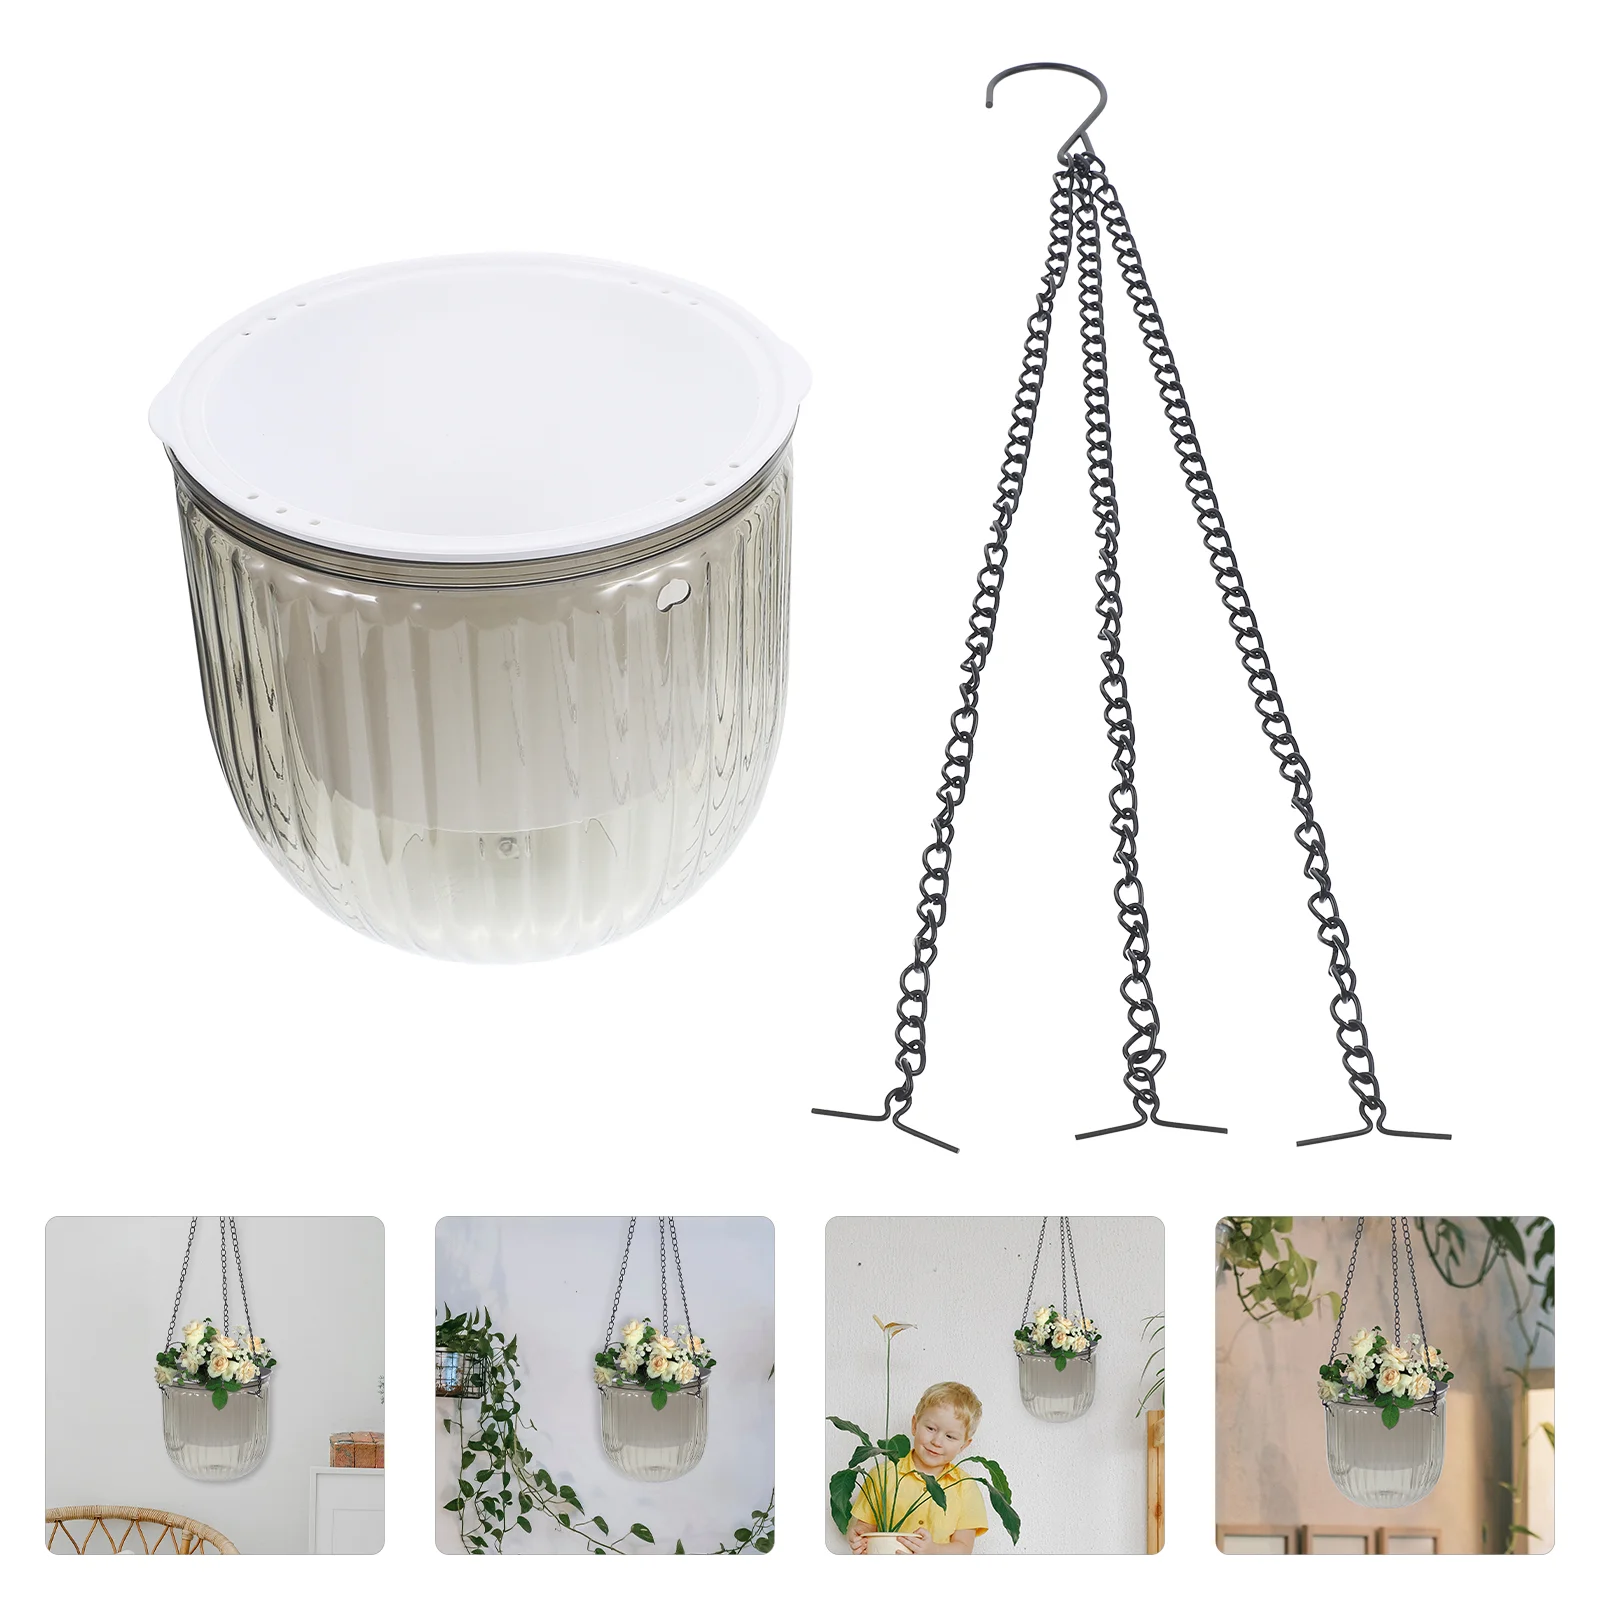 

Pot Hanging Planter Watering Pots Wall Self Flower Planters Indoor Plastic Hydroponics Orchid Auto Succulent Water Irrigation